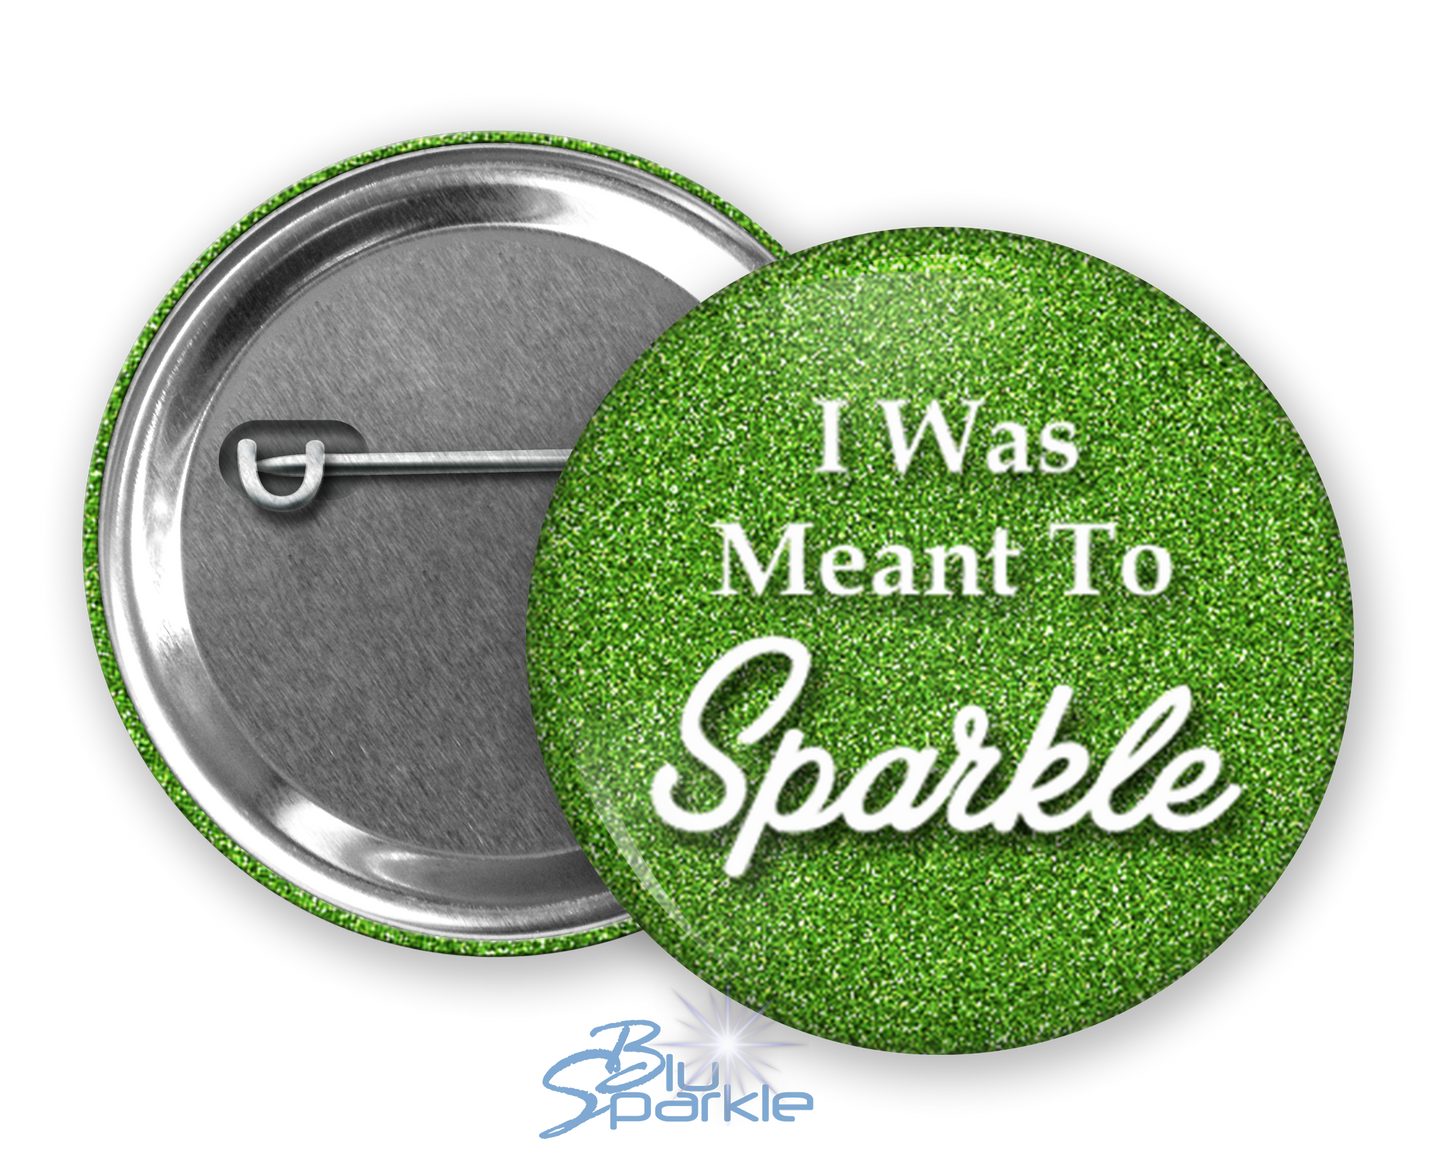 I Was Meant To Sparkle - Pinback Buttons